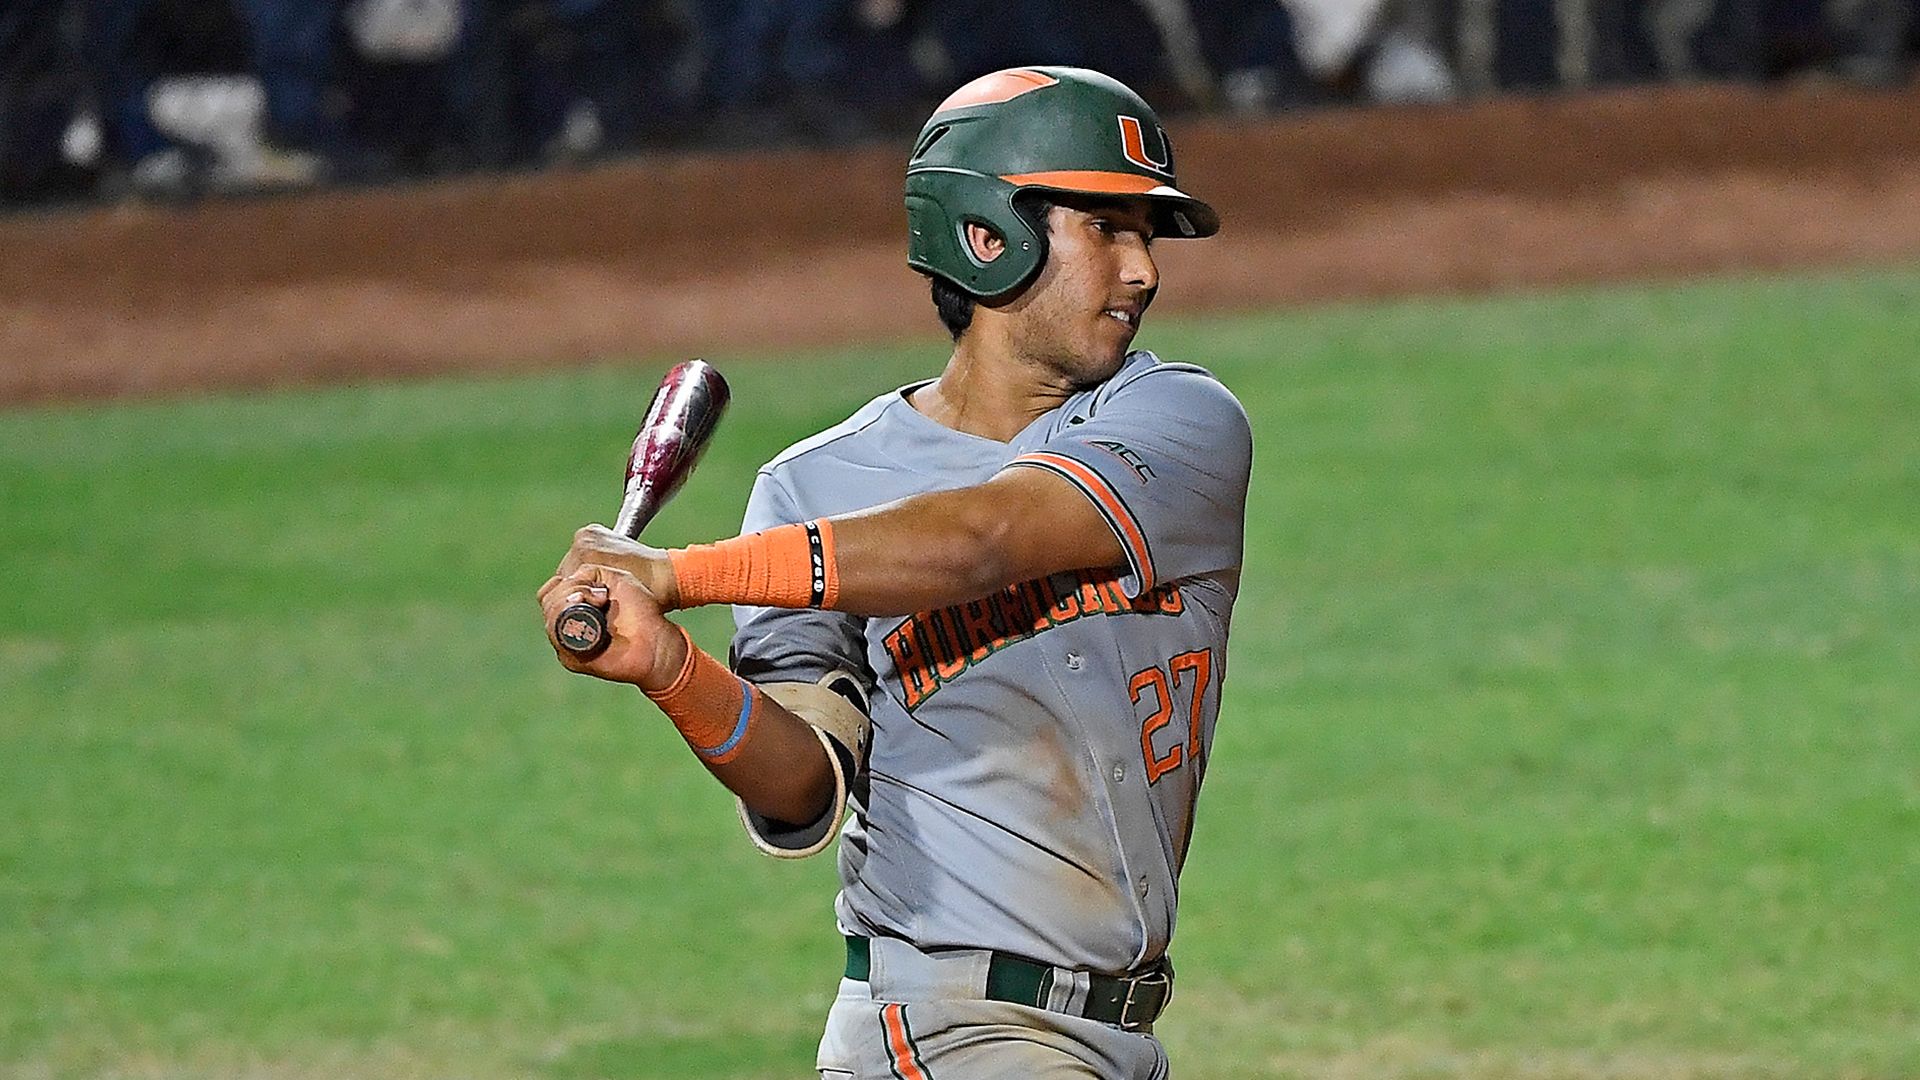 Five Homers Power No. 19 Miami in 8-4 Win at Wake